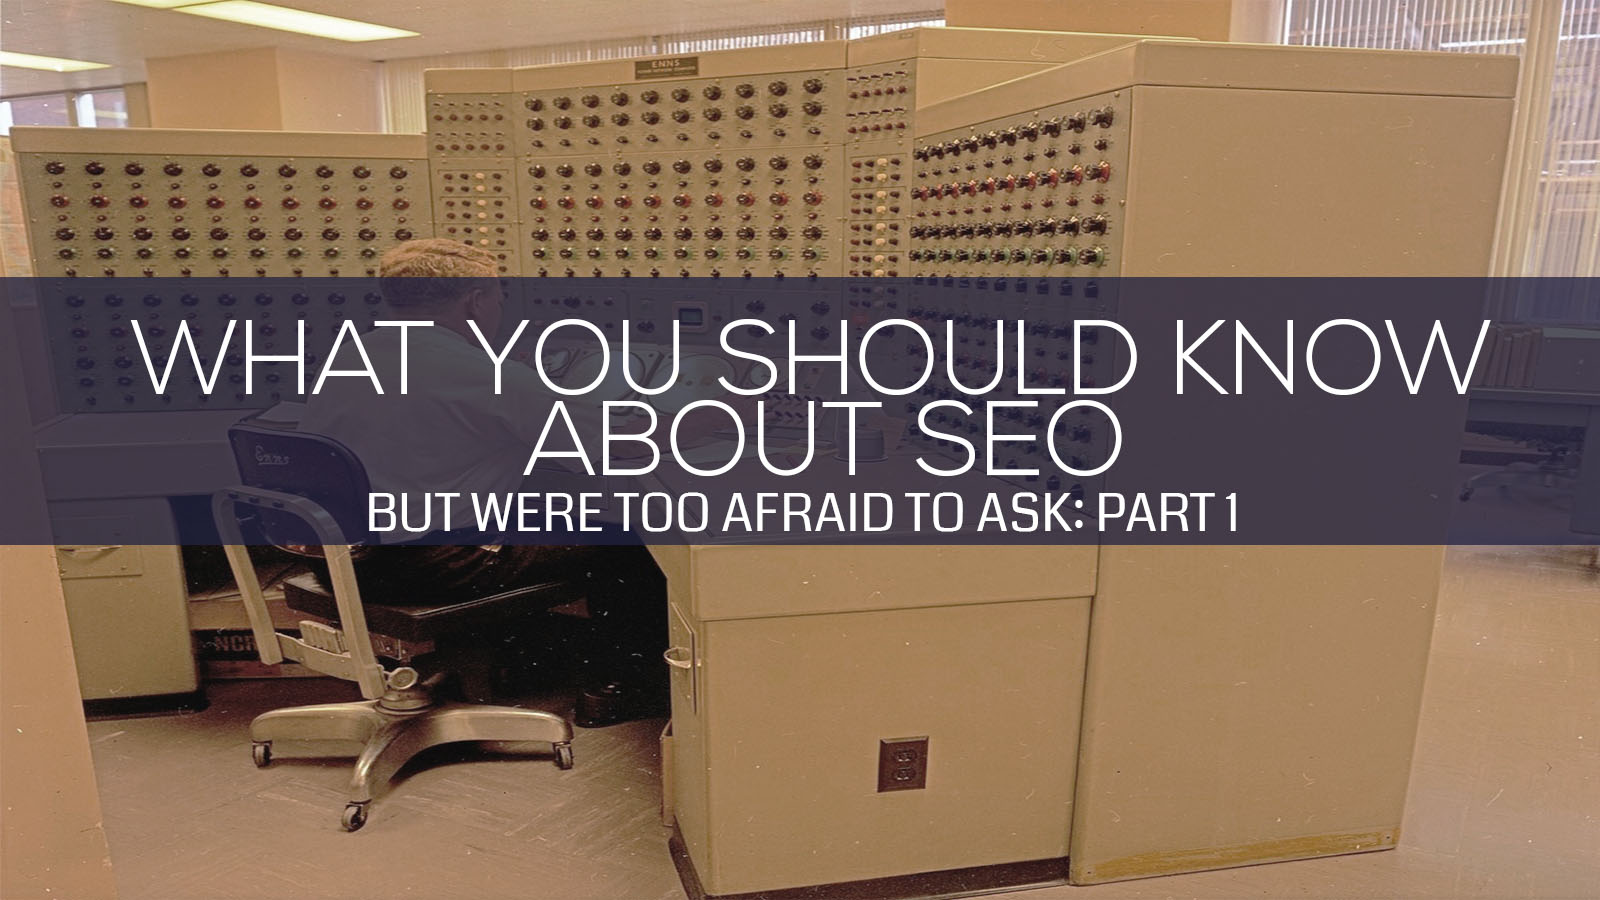 What You Should Know About SEO: Part 1